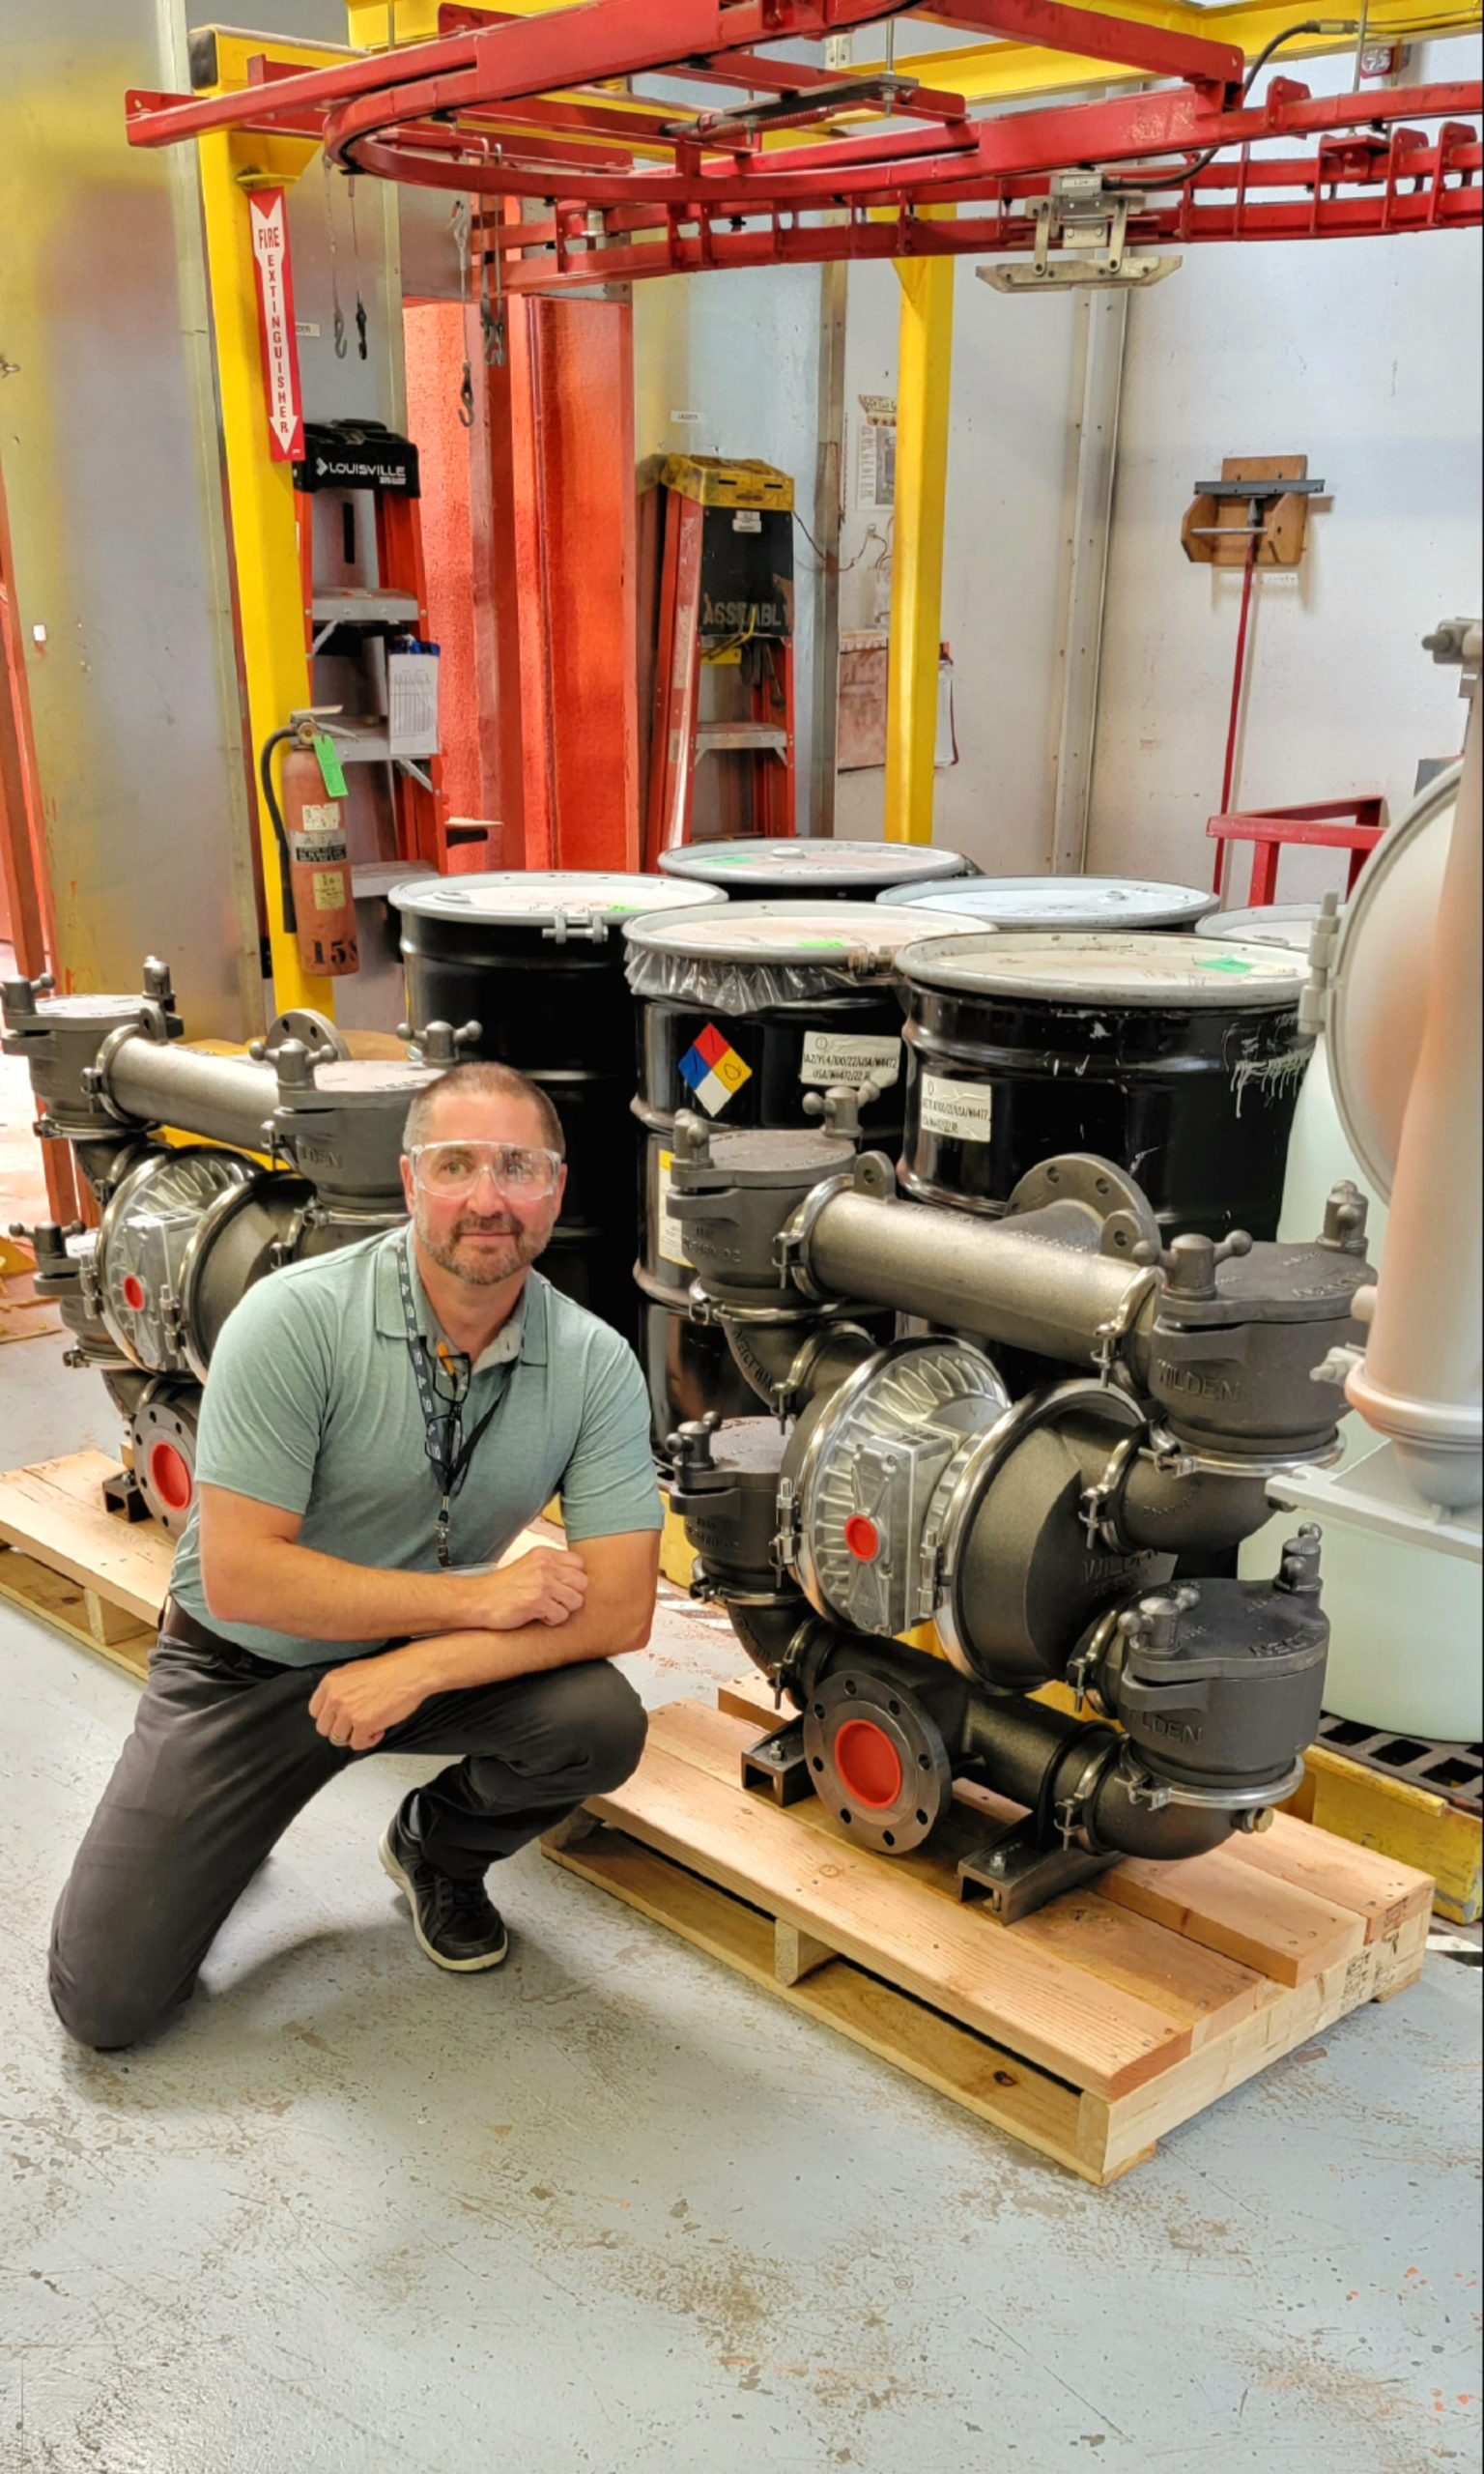 Staff member posing next to an industrial centrifugal pump